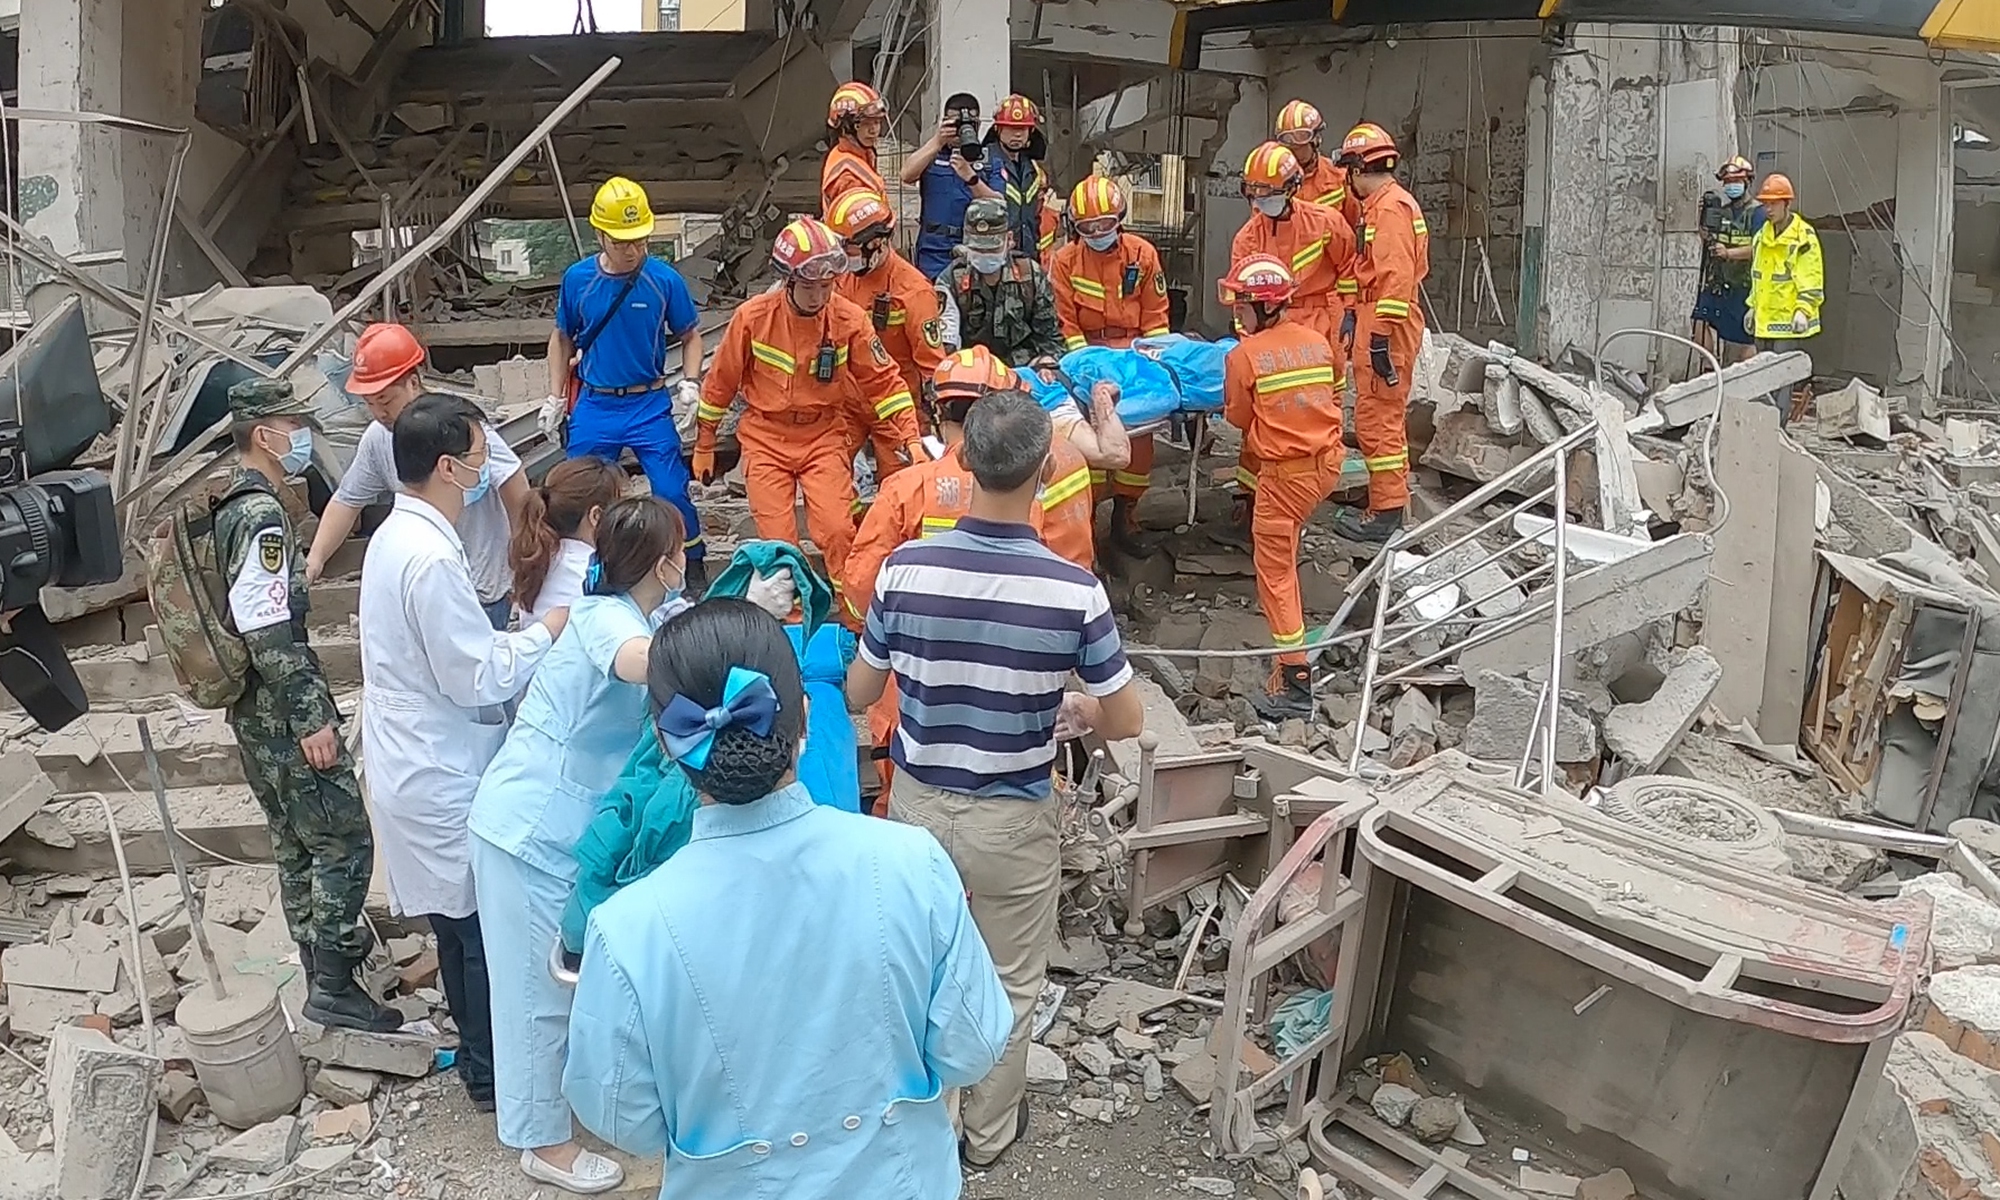 Firefighters carry a person injured in a gas explosion in a residential community in Shiyan, Central China's Hubei Province. The accident killed 25 and injured 138, according to information available as of Monday afternoon.  Rescue work and investigation of the cause are still in progress. Photo: VCG